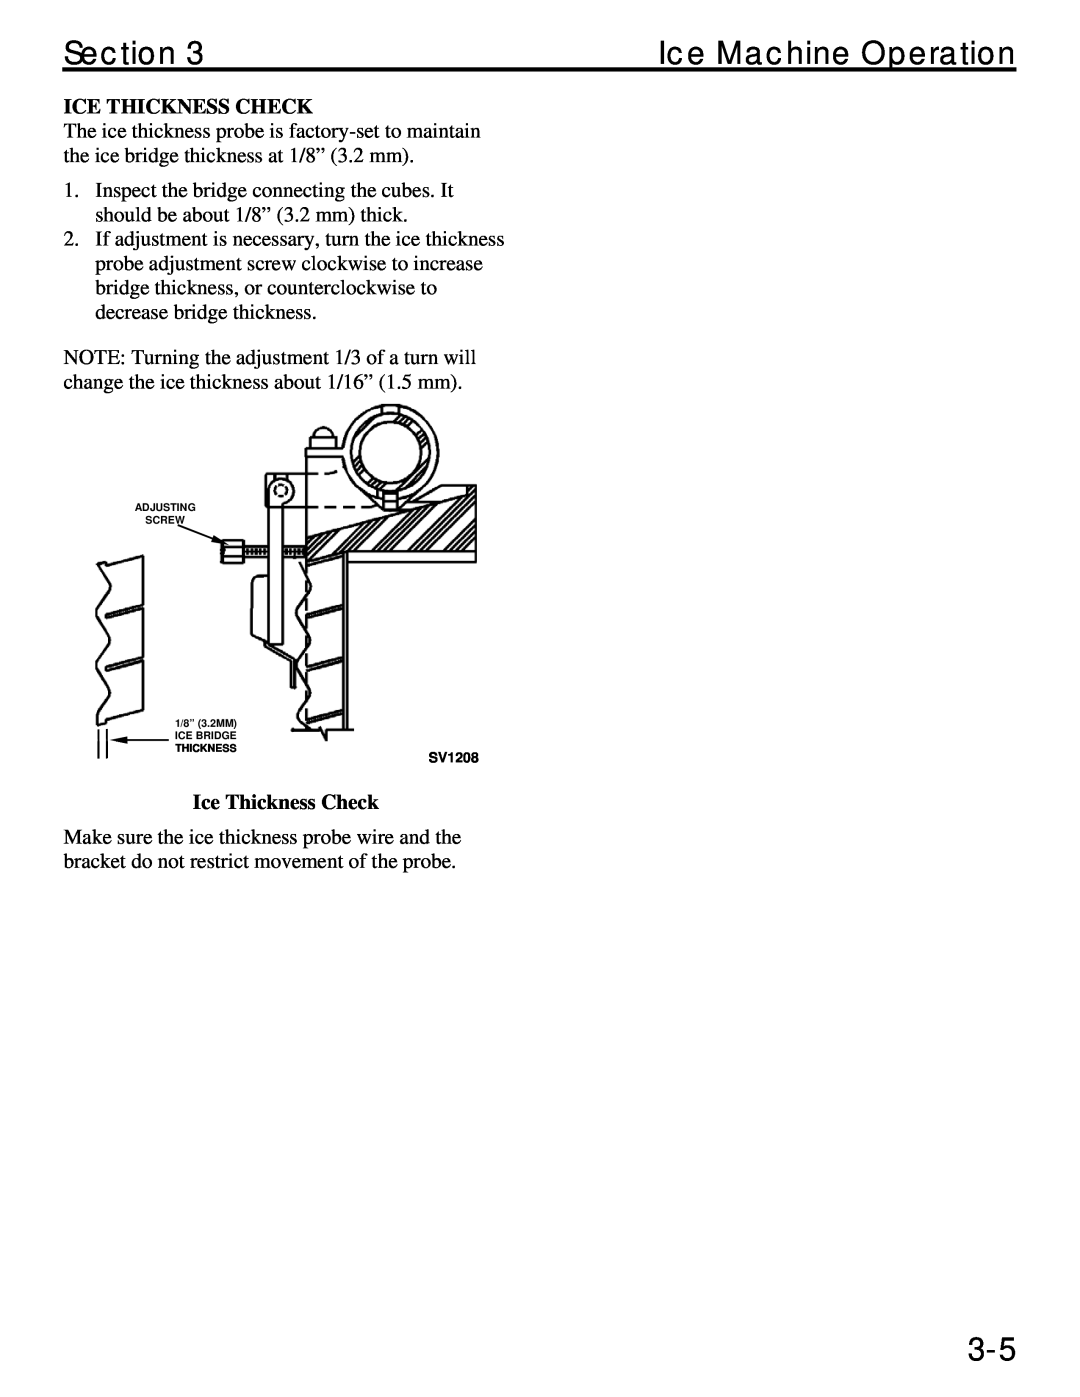 Manitowoc Ice QM45 Series service manual Ice Thickness Check, Section, Ice Machine Operation 